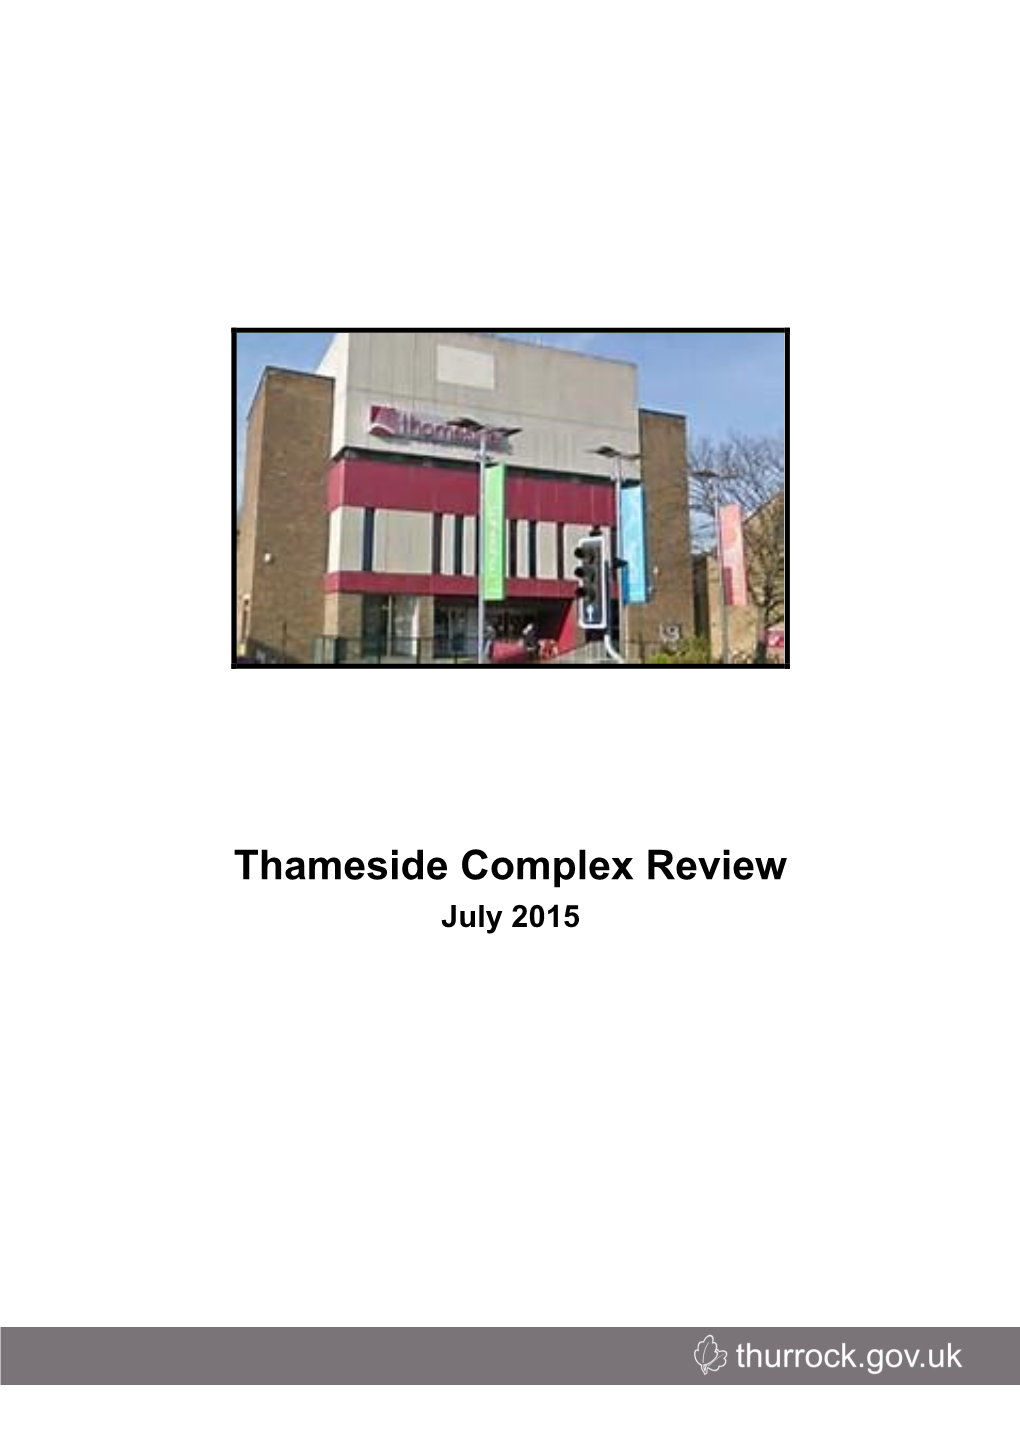 Thameside Complex Review July 2015